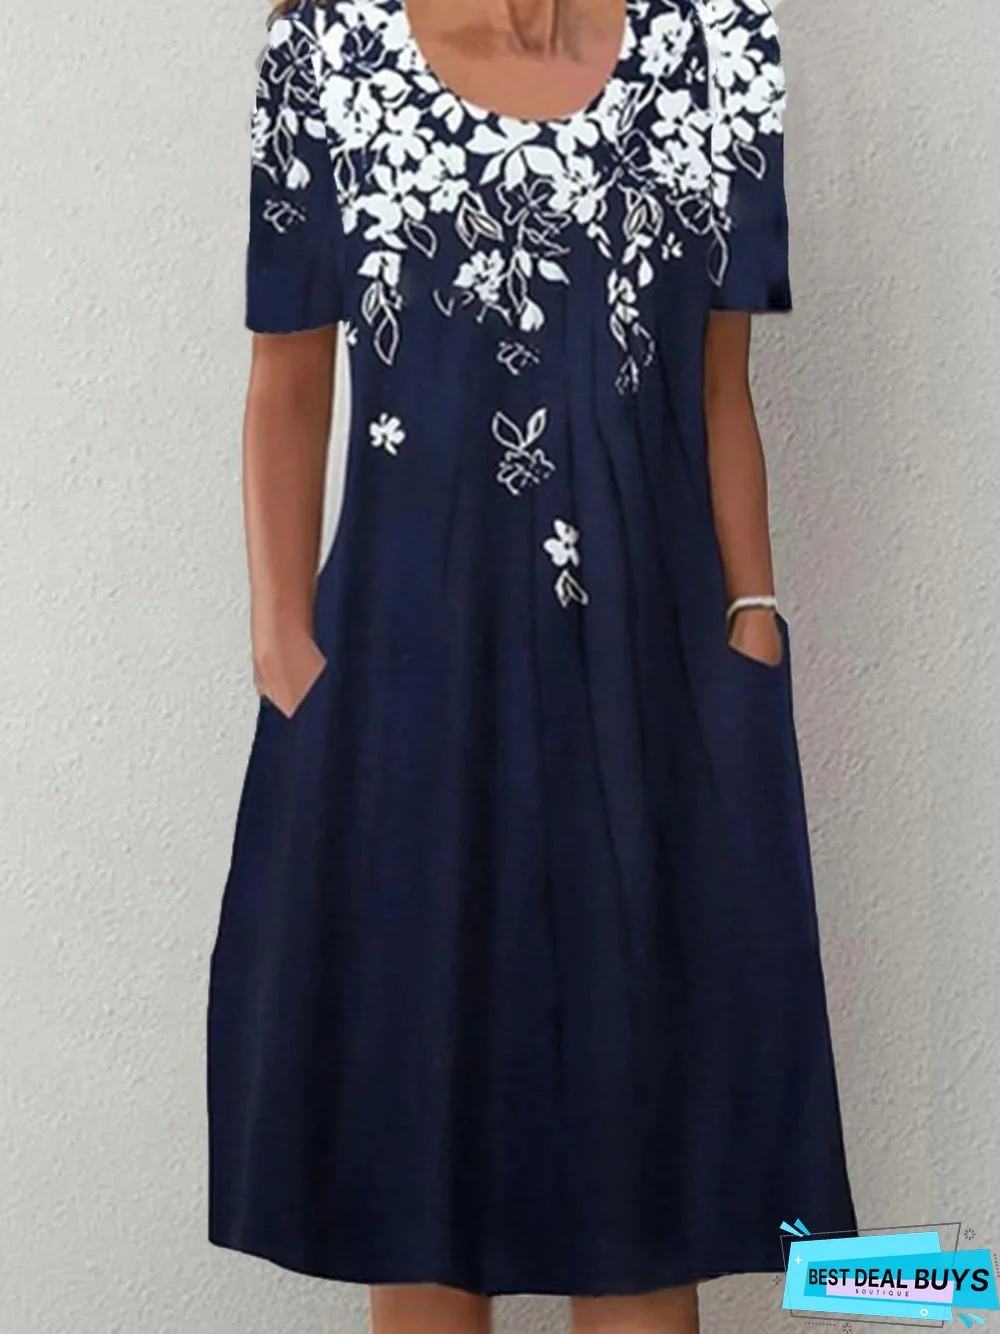 Women's Weekend Daily Floral Casual Short Sleeve Pockets A-Line Midi Dress